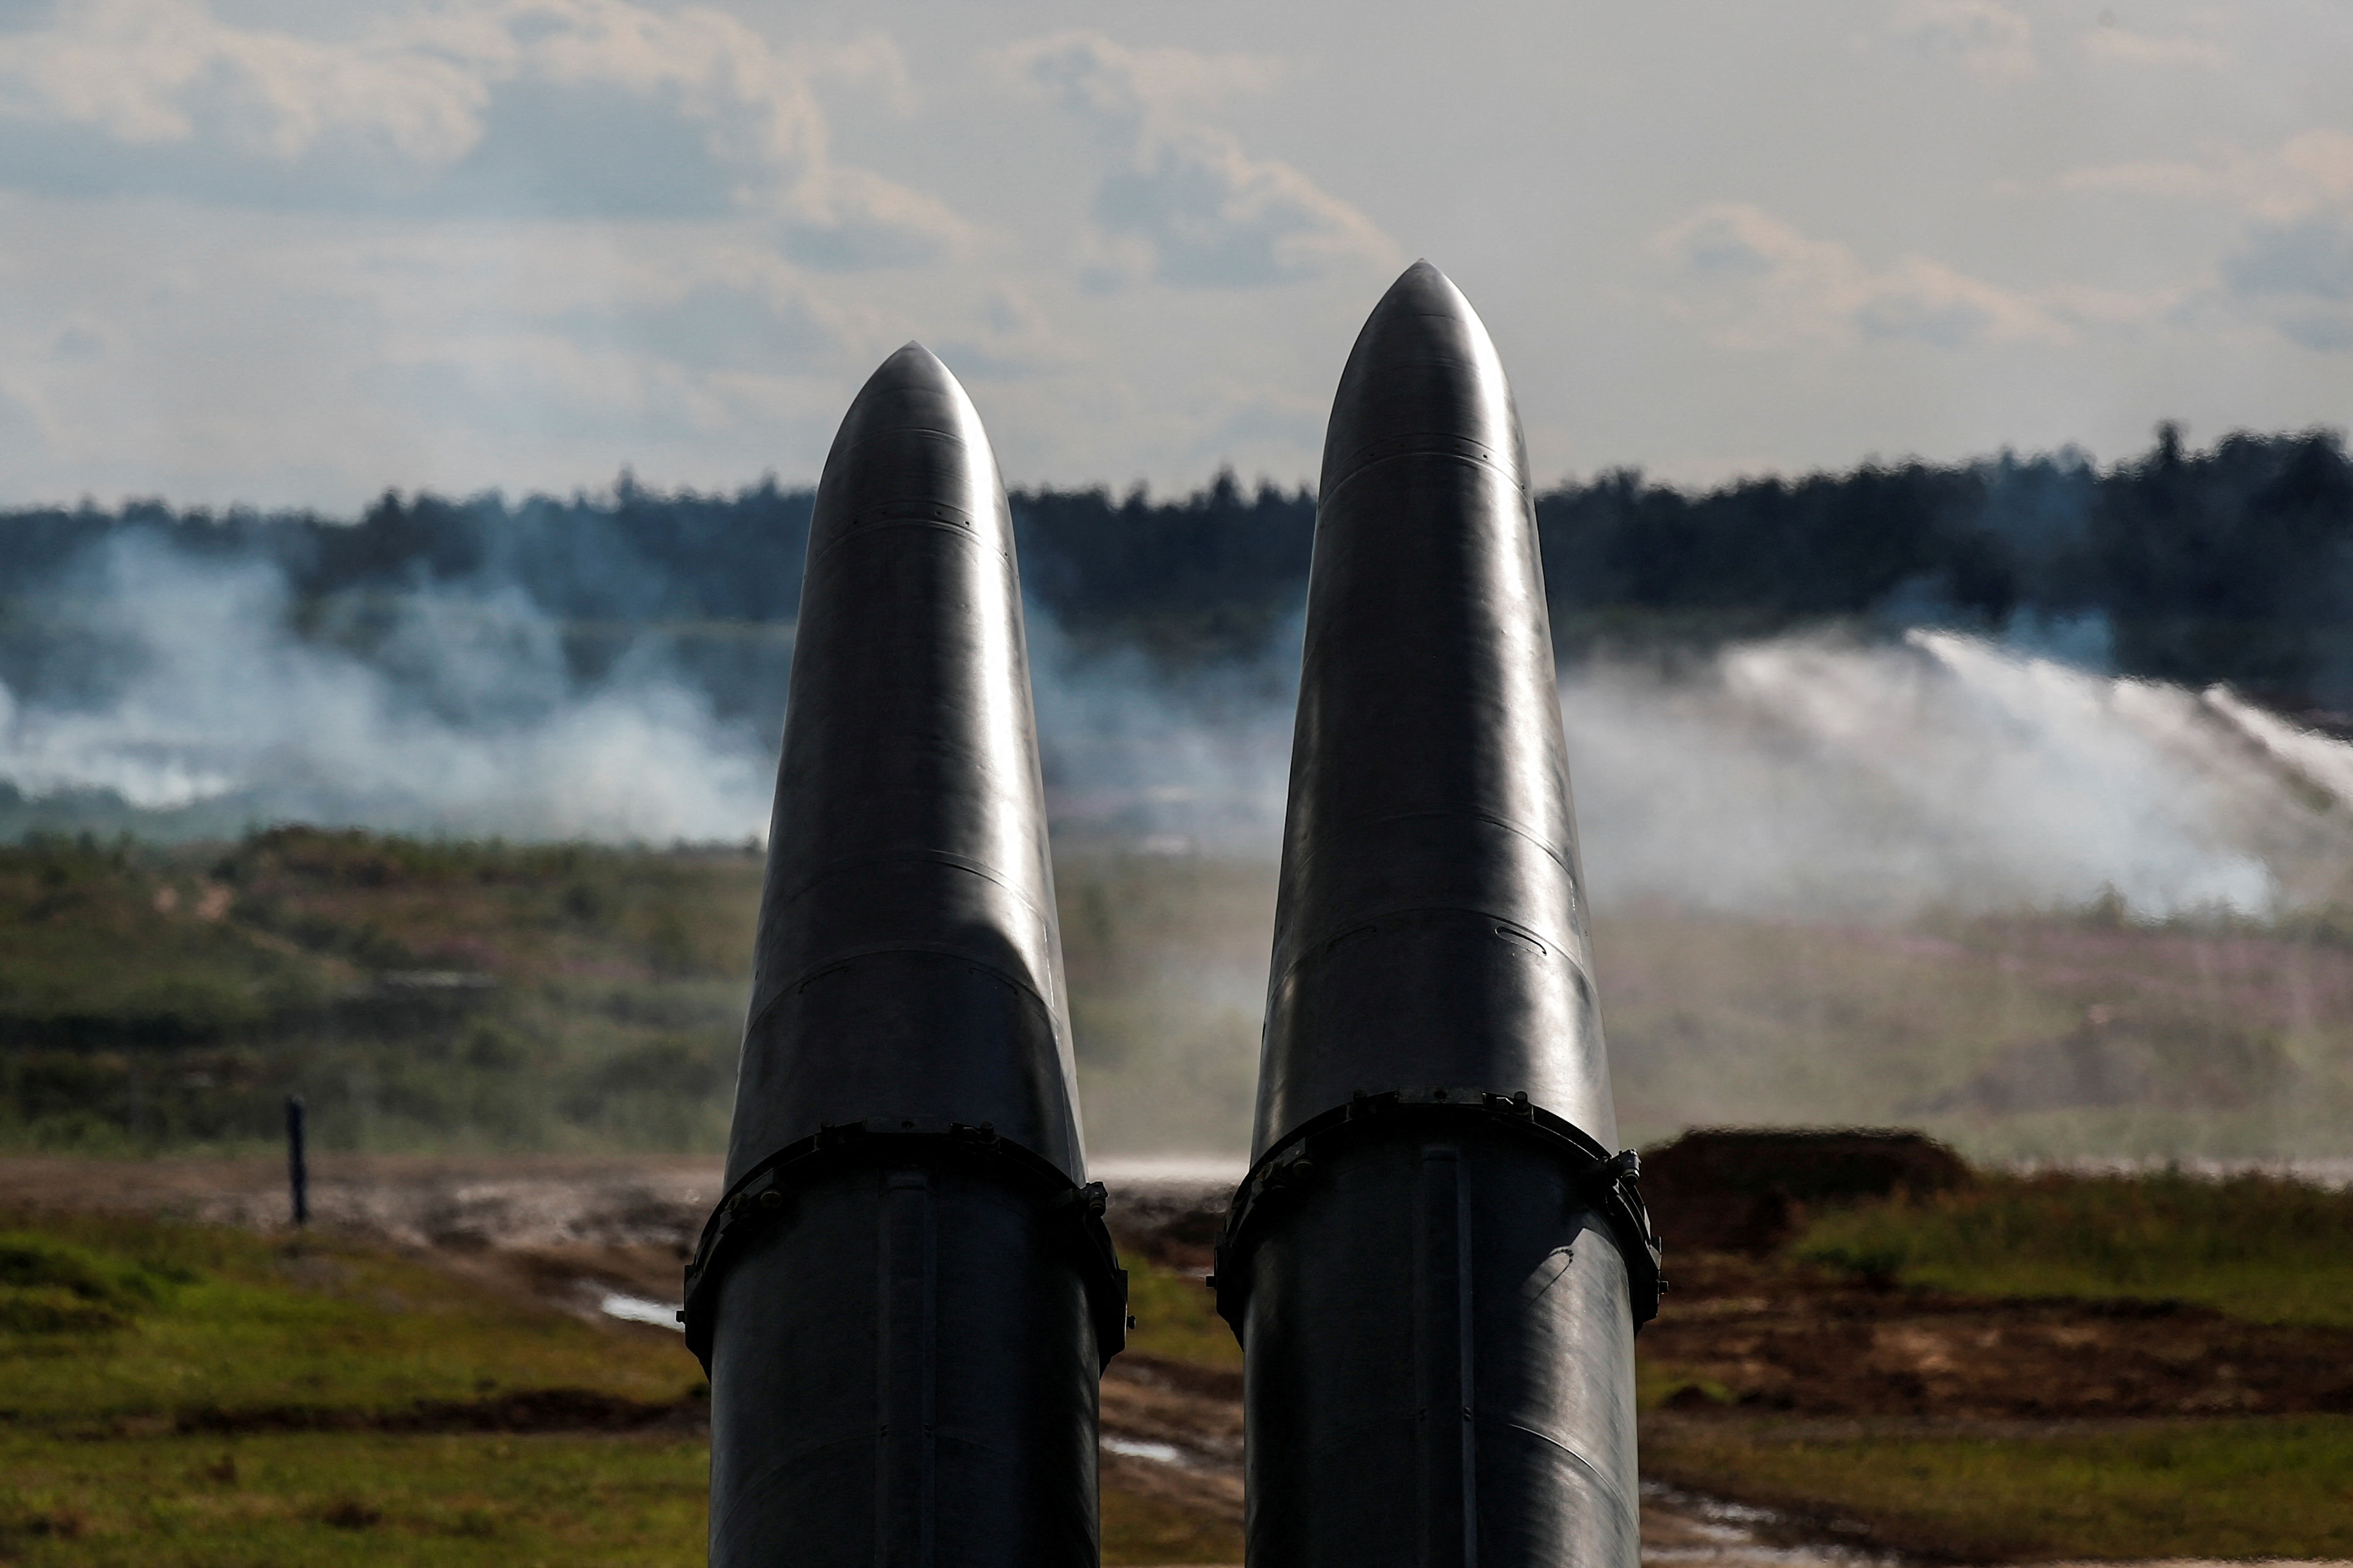 9М723 missiles, part of  Iskander-M missile complex, are seen during a demonstration at the International military-technical forum ARMY-2019 at Alabino range in Moscow Region